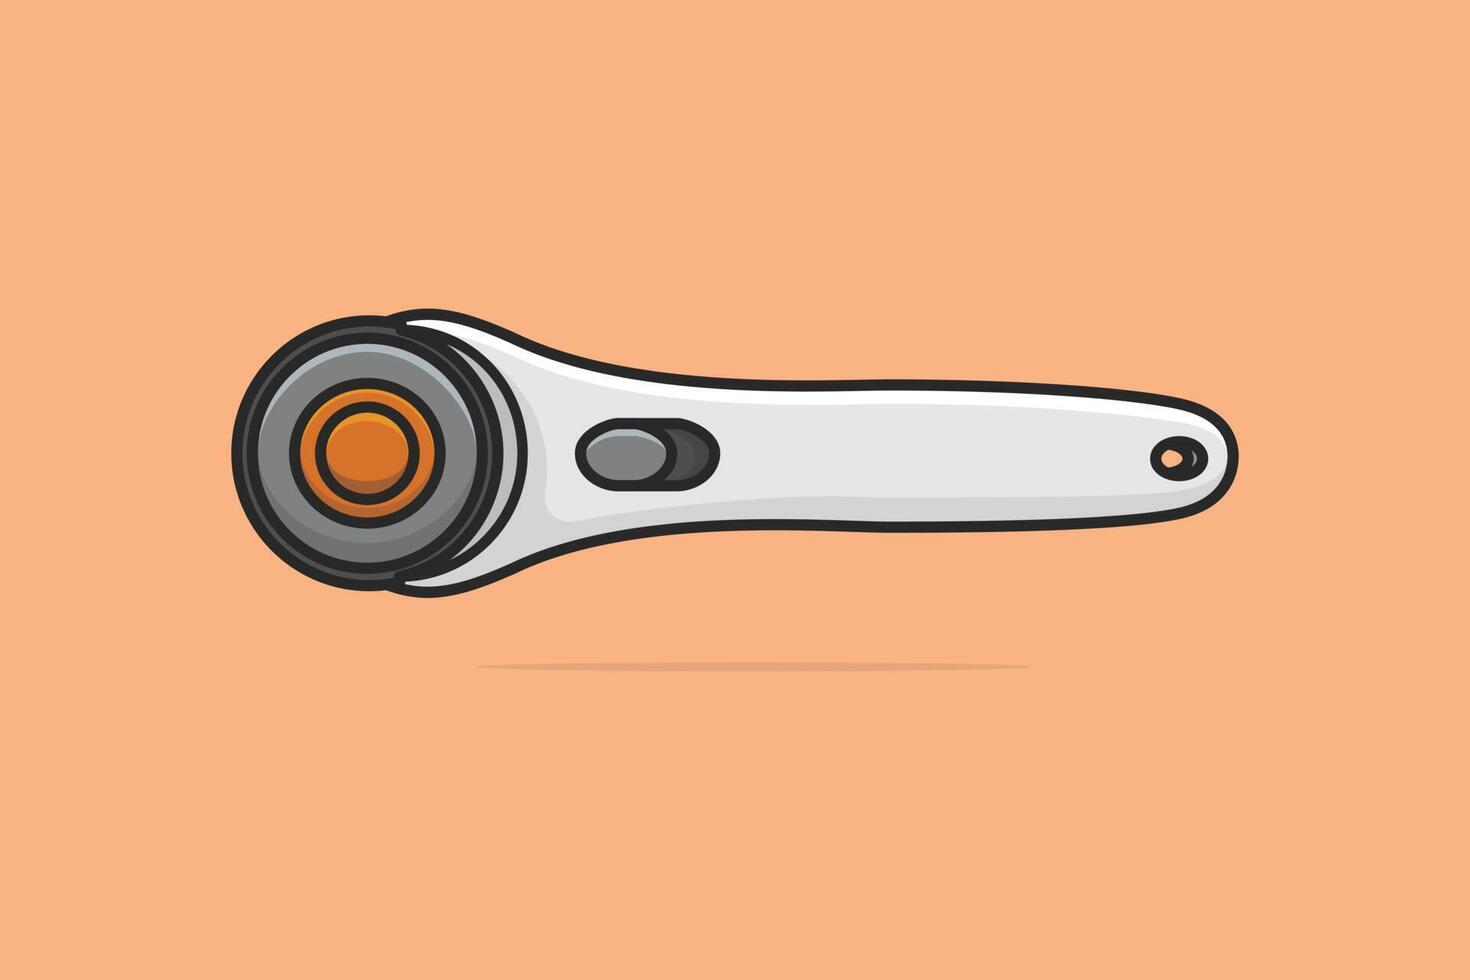 Electric Angle Grinder vector illustration. Mechanic and Gardening working tool object icon concept. Wireless grinder with round cutter vector design on light orange background.